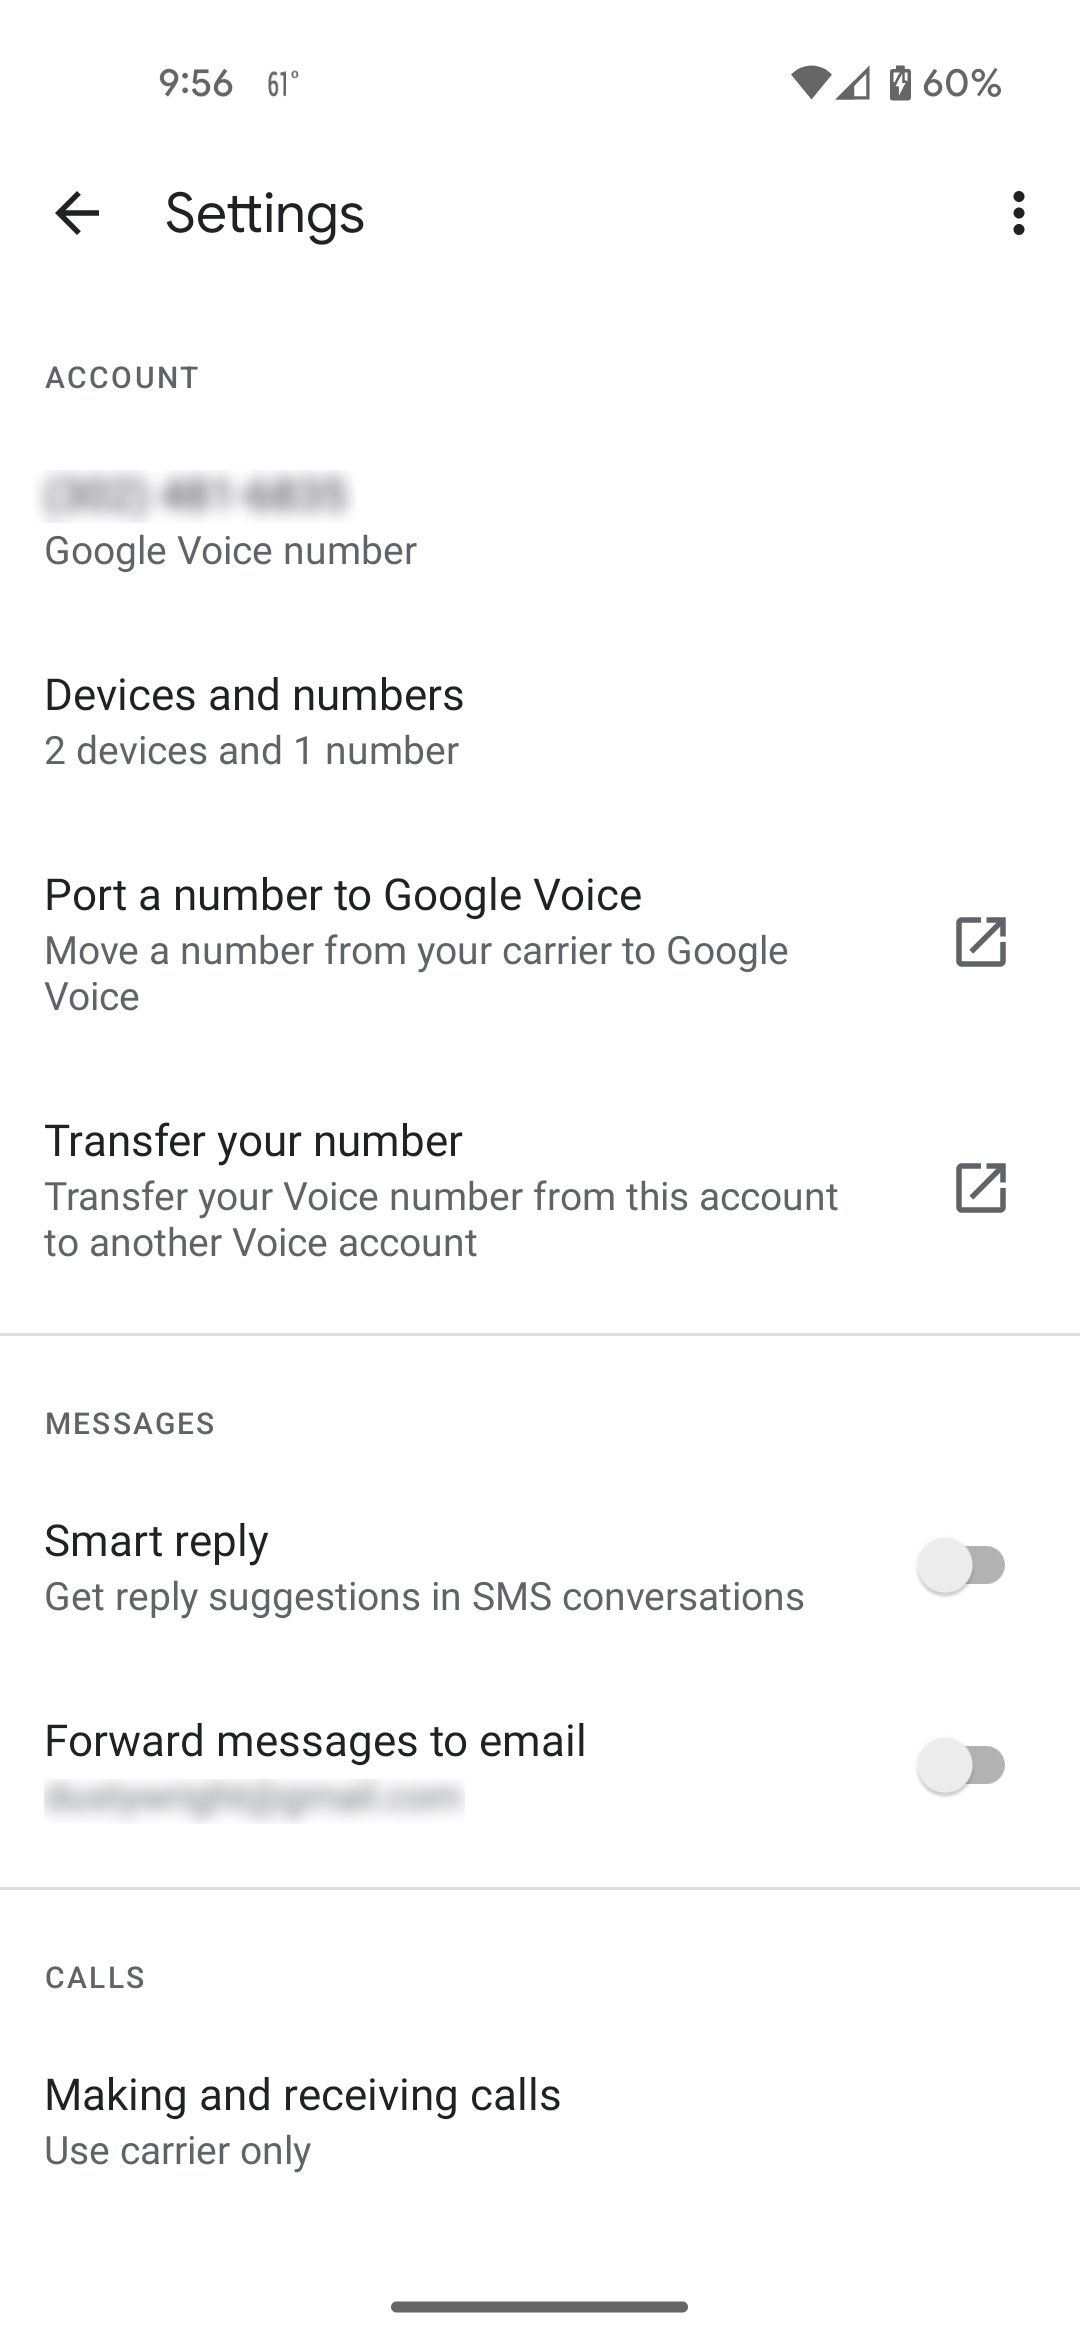 Google Voice settings page showing the devices and numbers option 